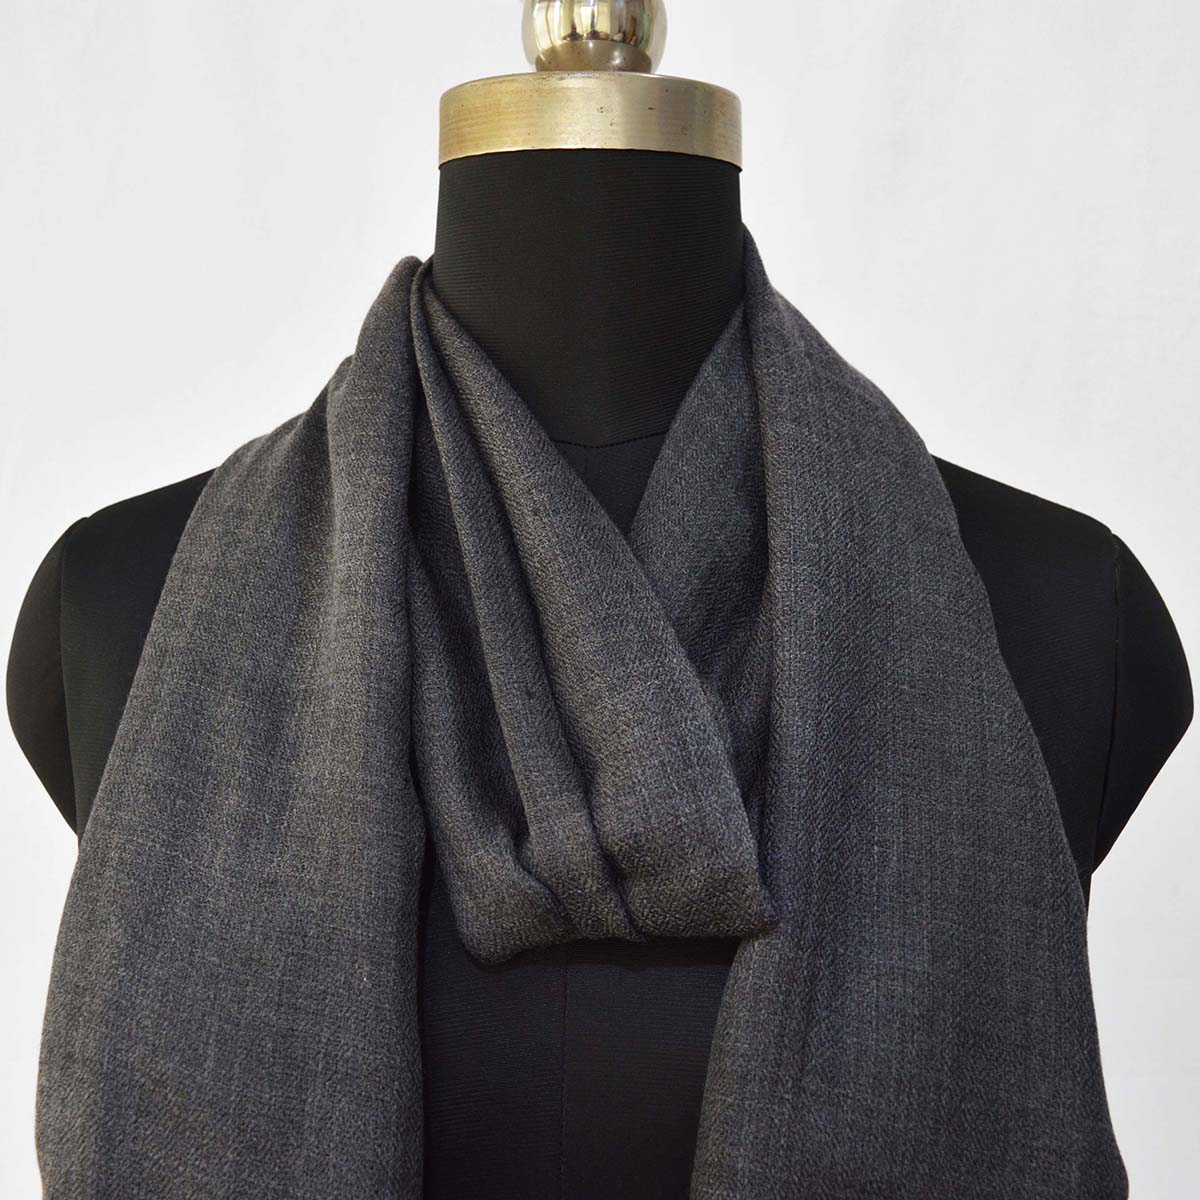 CHARCOAL fine wool scarf women/men, solid colour, reversible, fashion shawl or stole or wrap, unisex